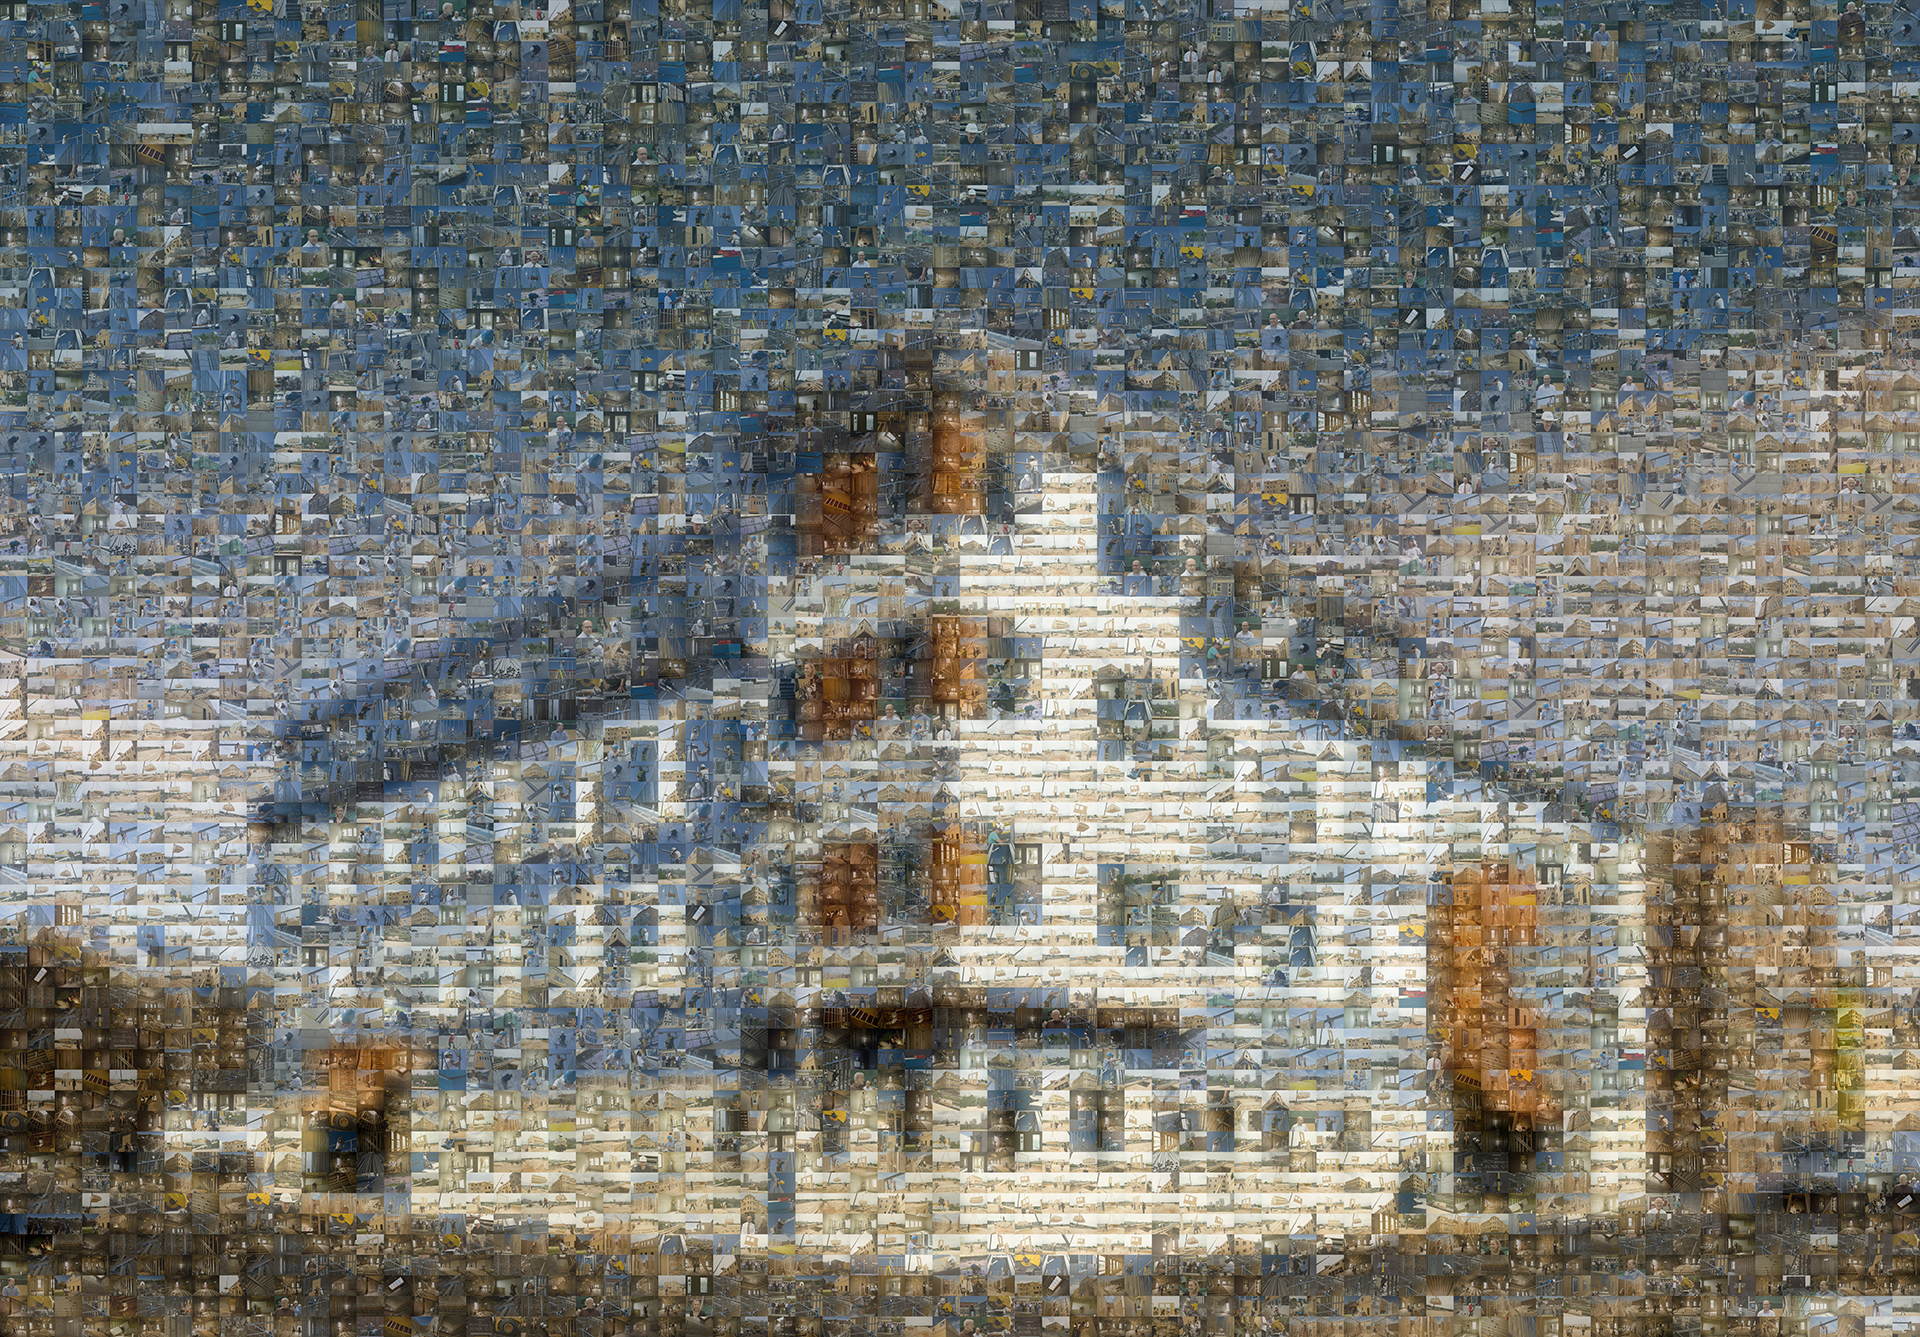 photo mosaic created using 1150 photos of the building being constructed